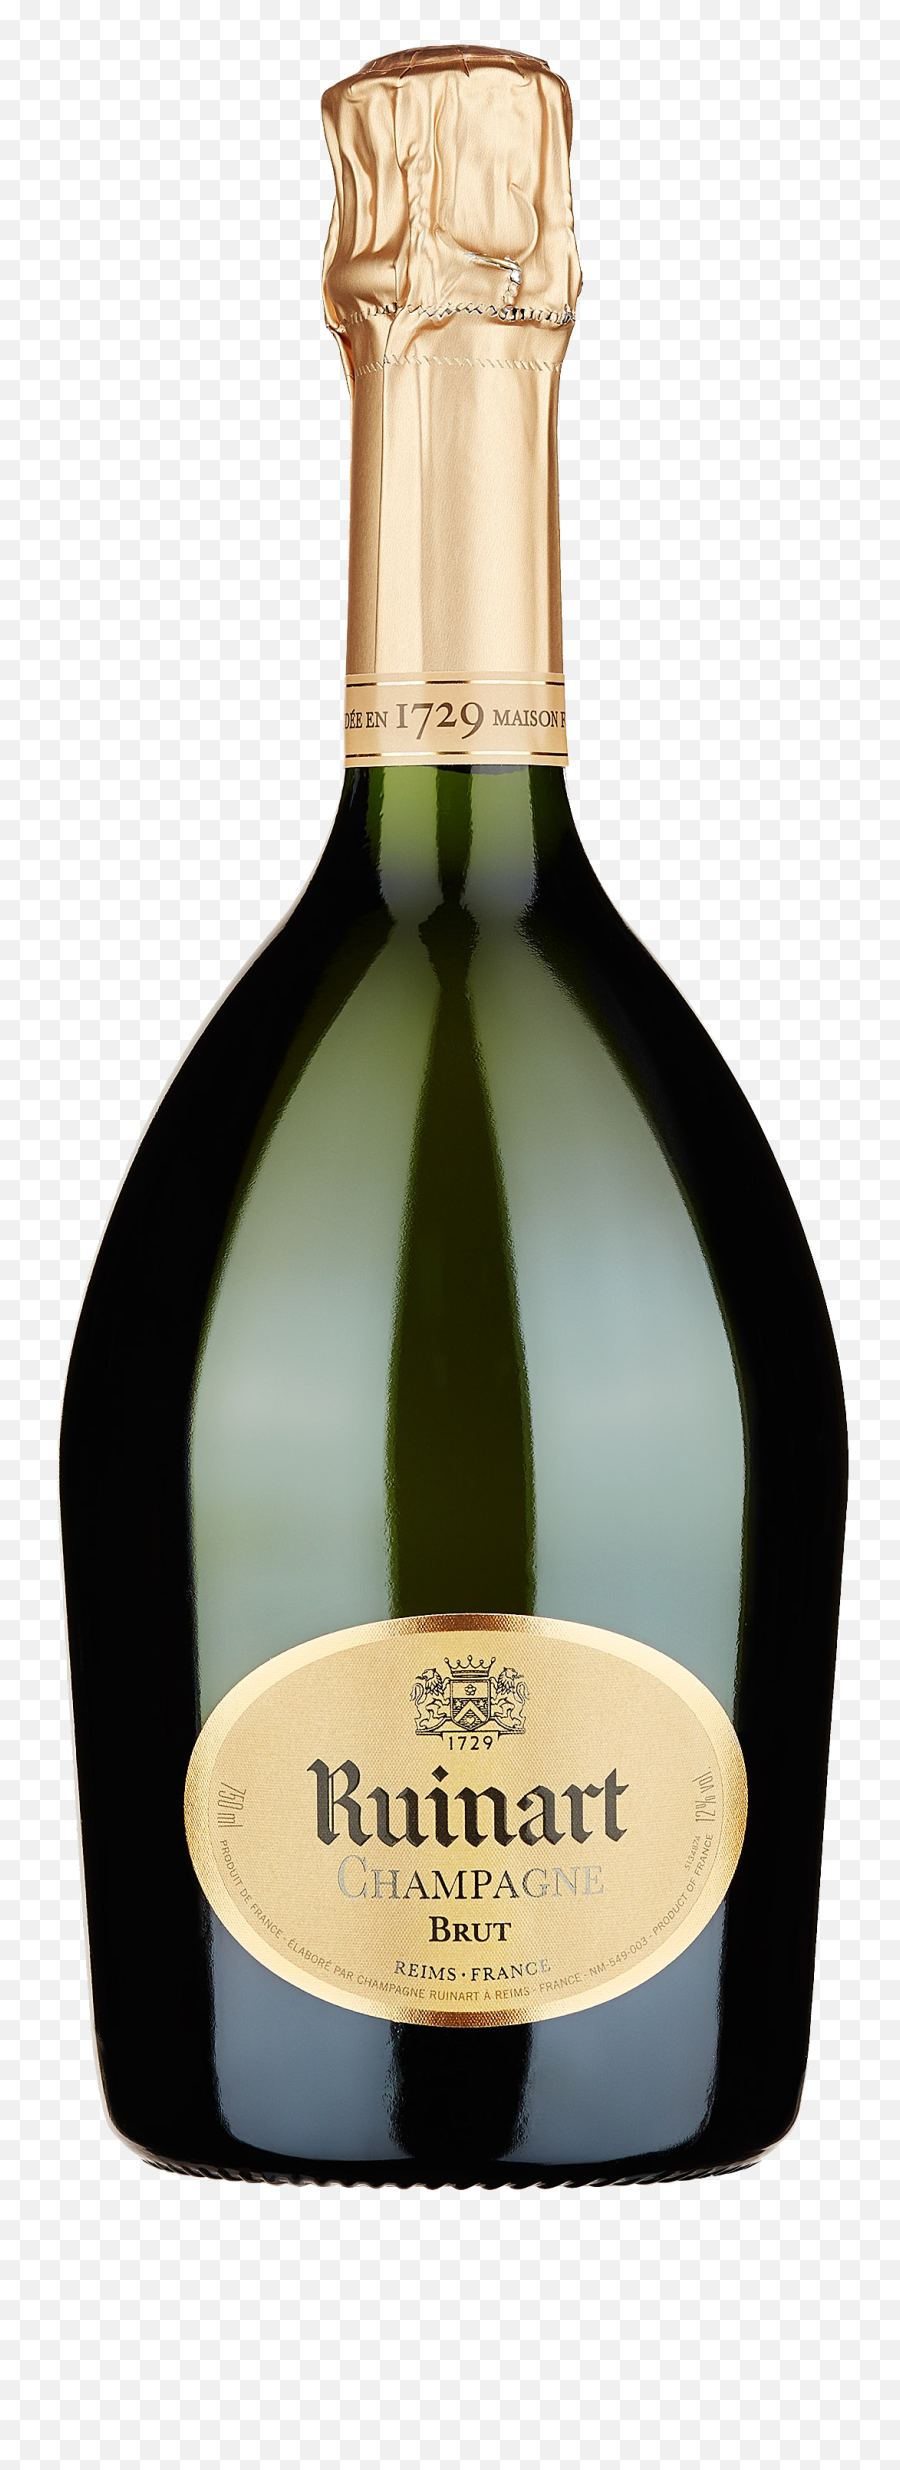 Champagne Bottle Png Photo - Ruinart,Champagne Bottle Png